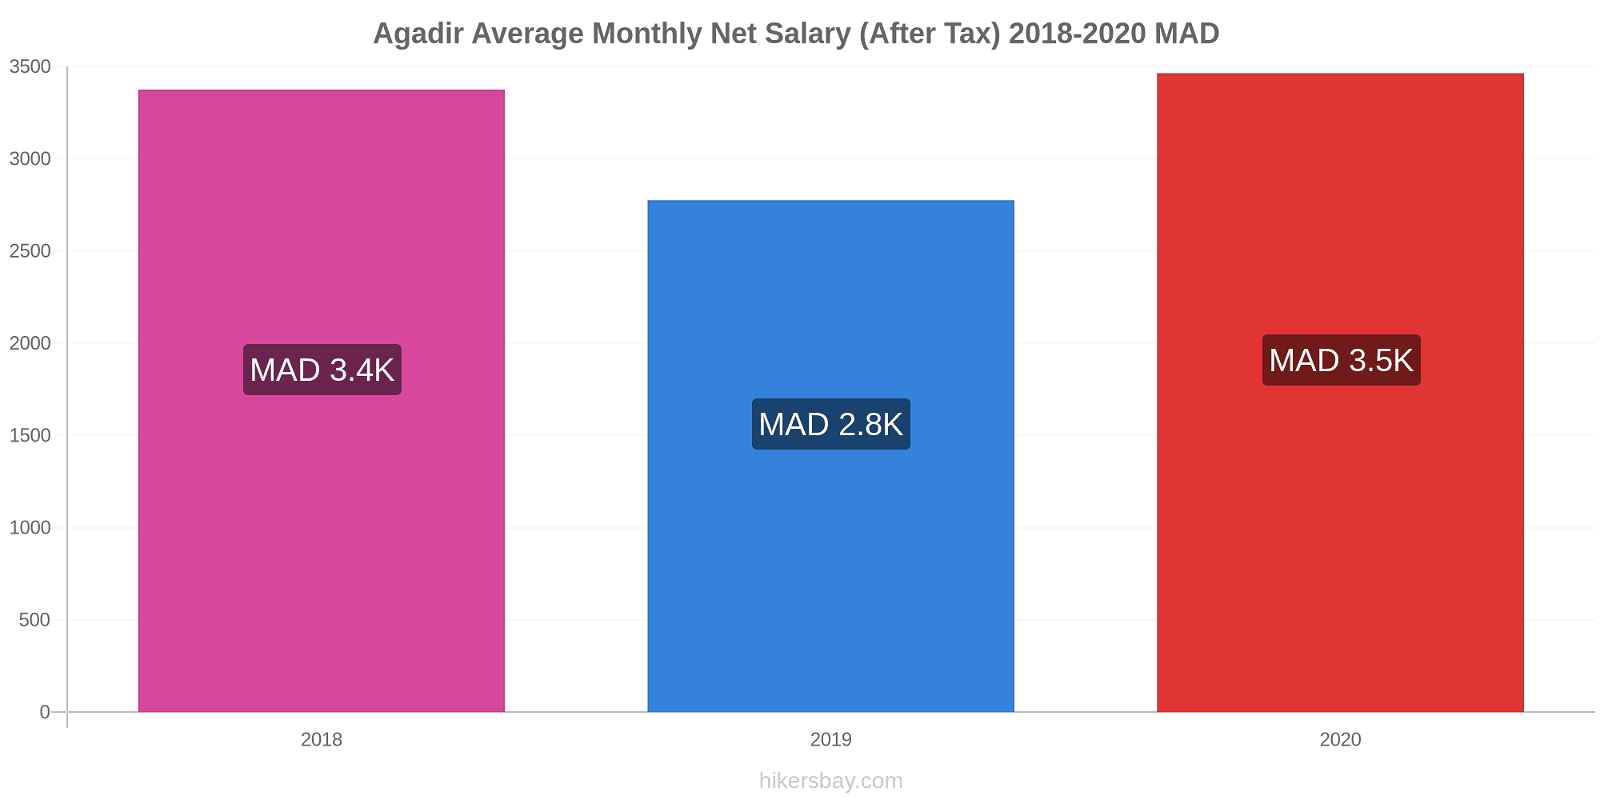 Agadir price changes Average Monthly Net Salary (After Tax) hikersbay.com